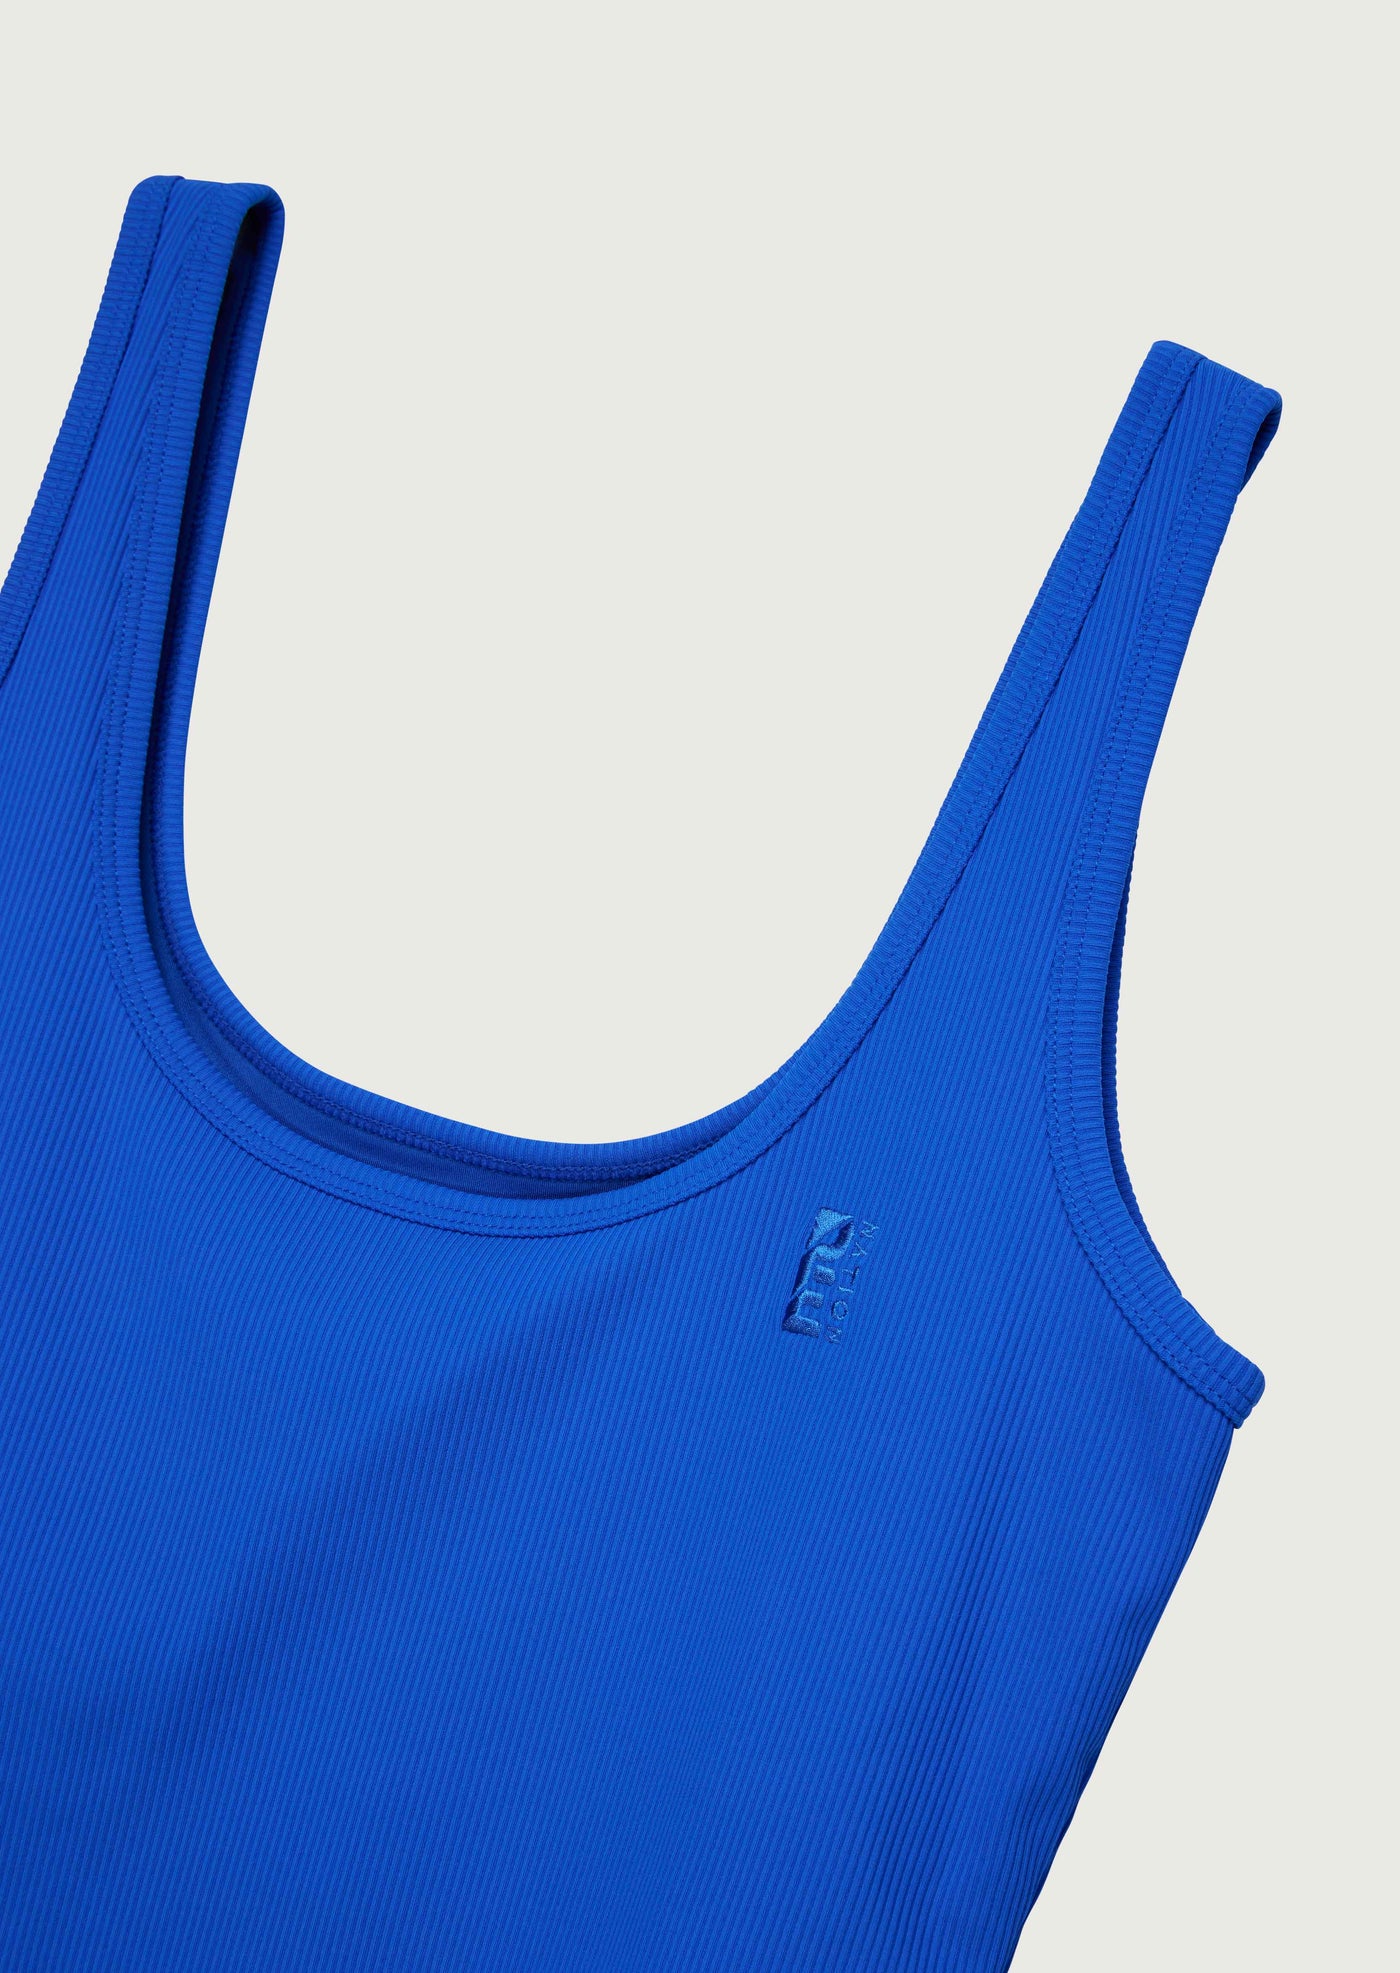 OVERTIME TANK IN ELECTRIC BLUE